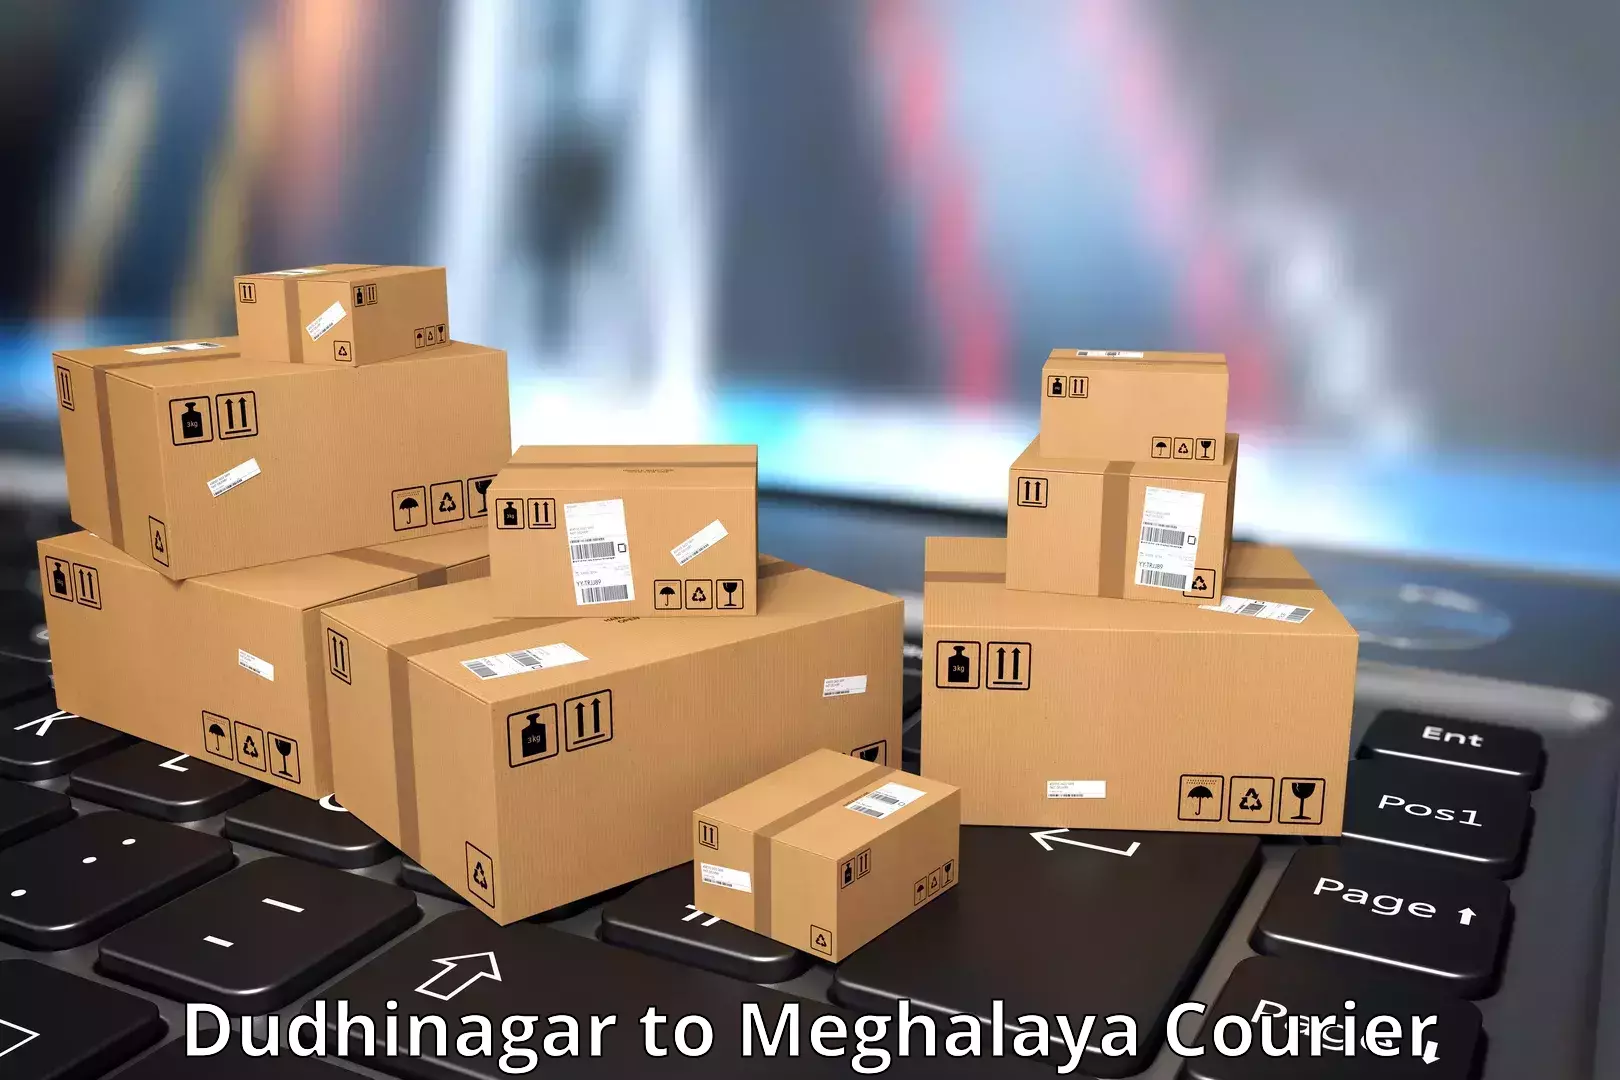 User-friendly delivery service Dudhinagar to Meghalaya